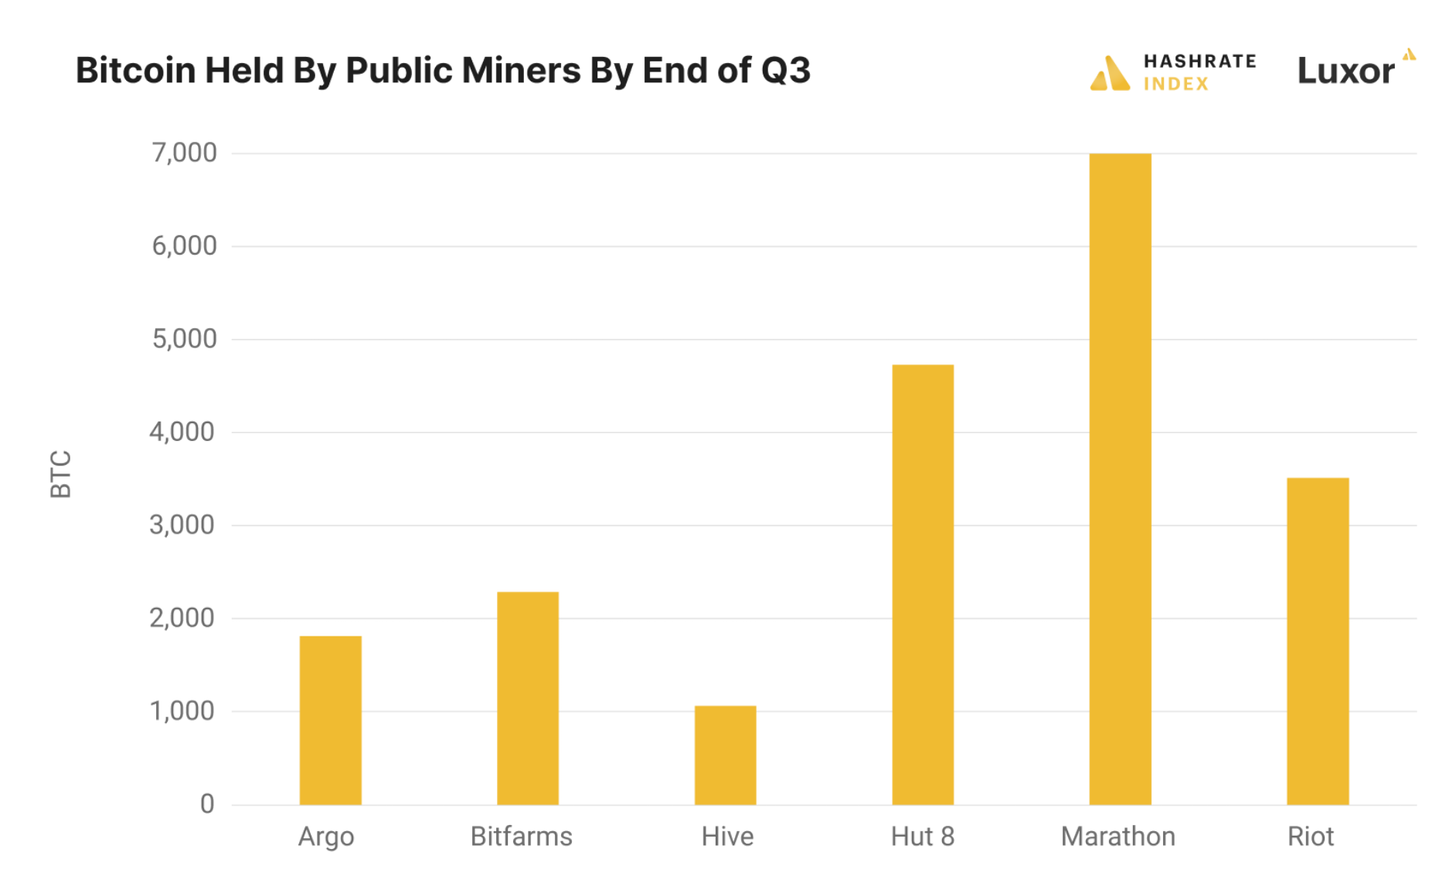 Bitcoin held by public miners